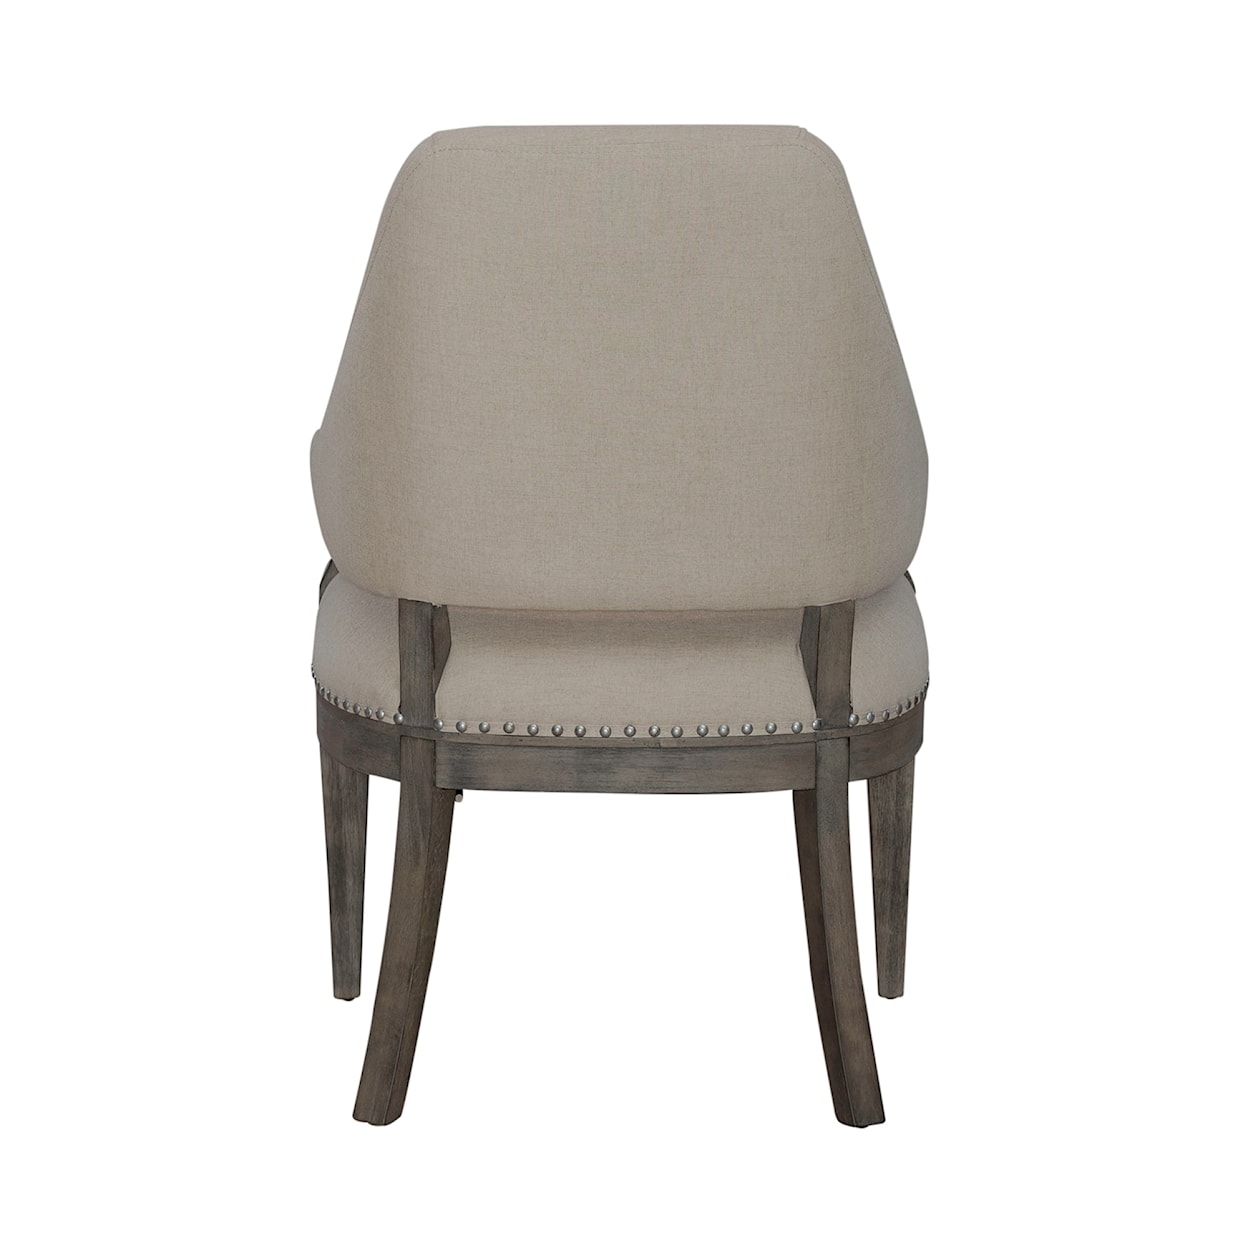 Liberty Furniture Westfield Upholstered Arm Chair